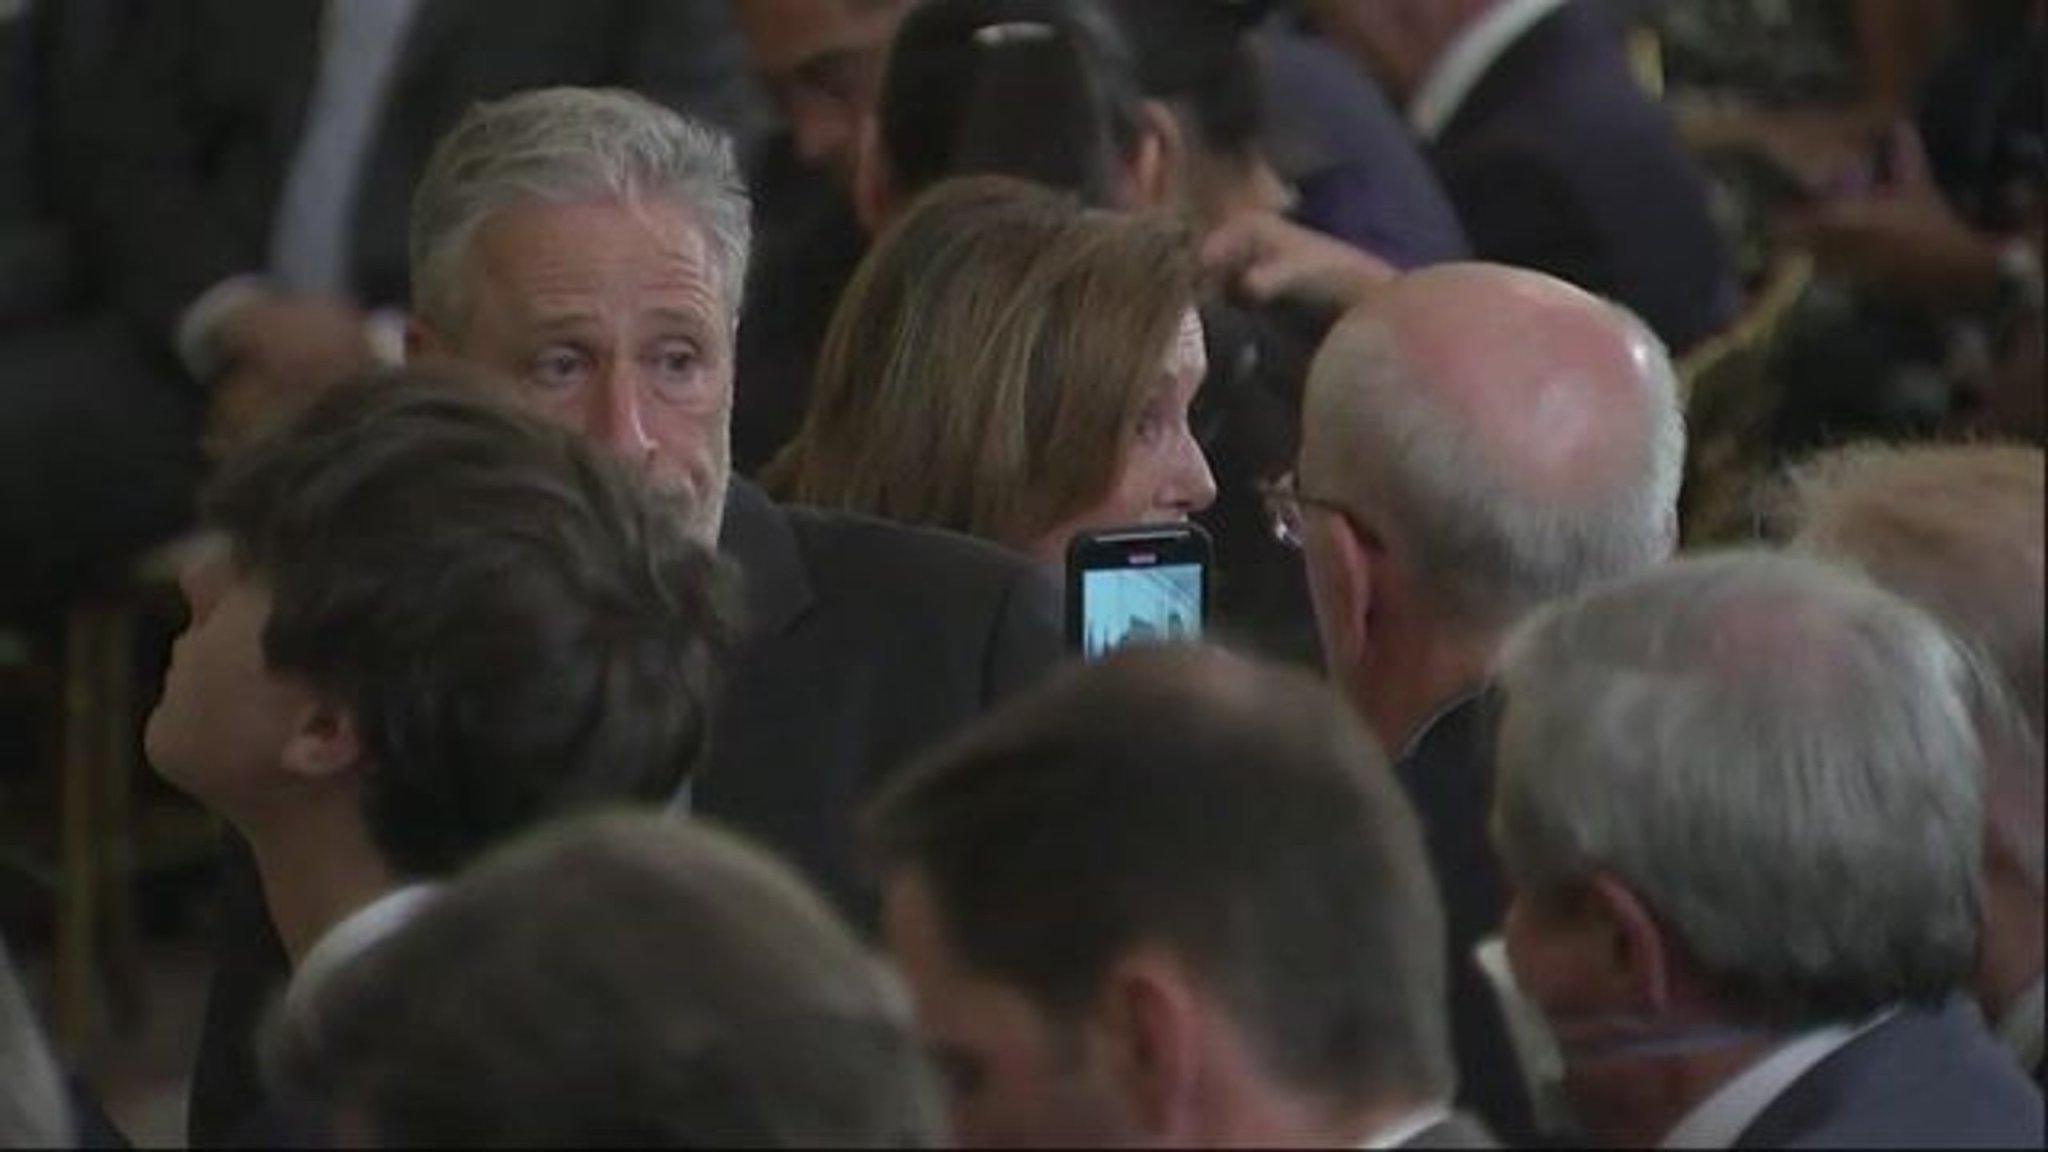 Jon Stewart seems to be in good spirits sitting front row ahead of President Biden signing the PACT Act.